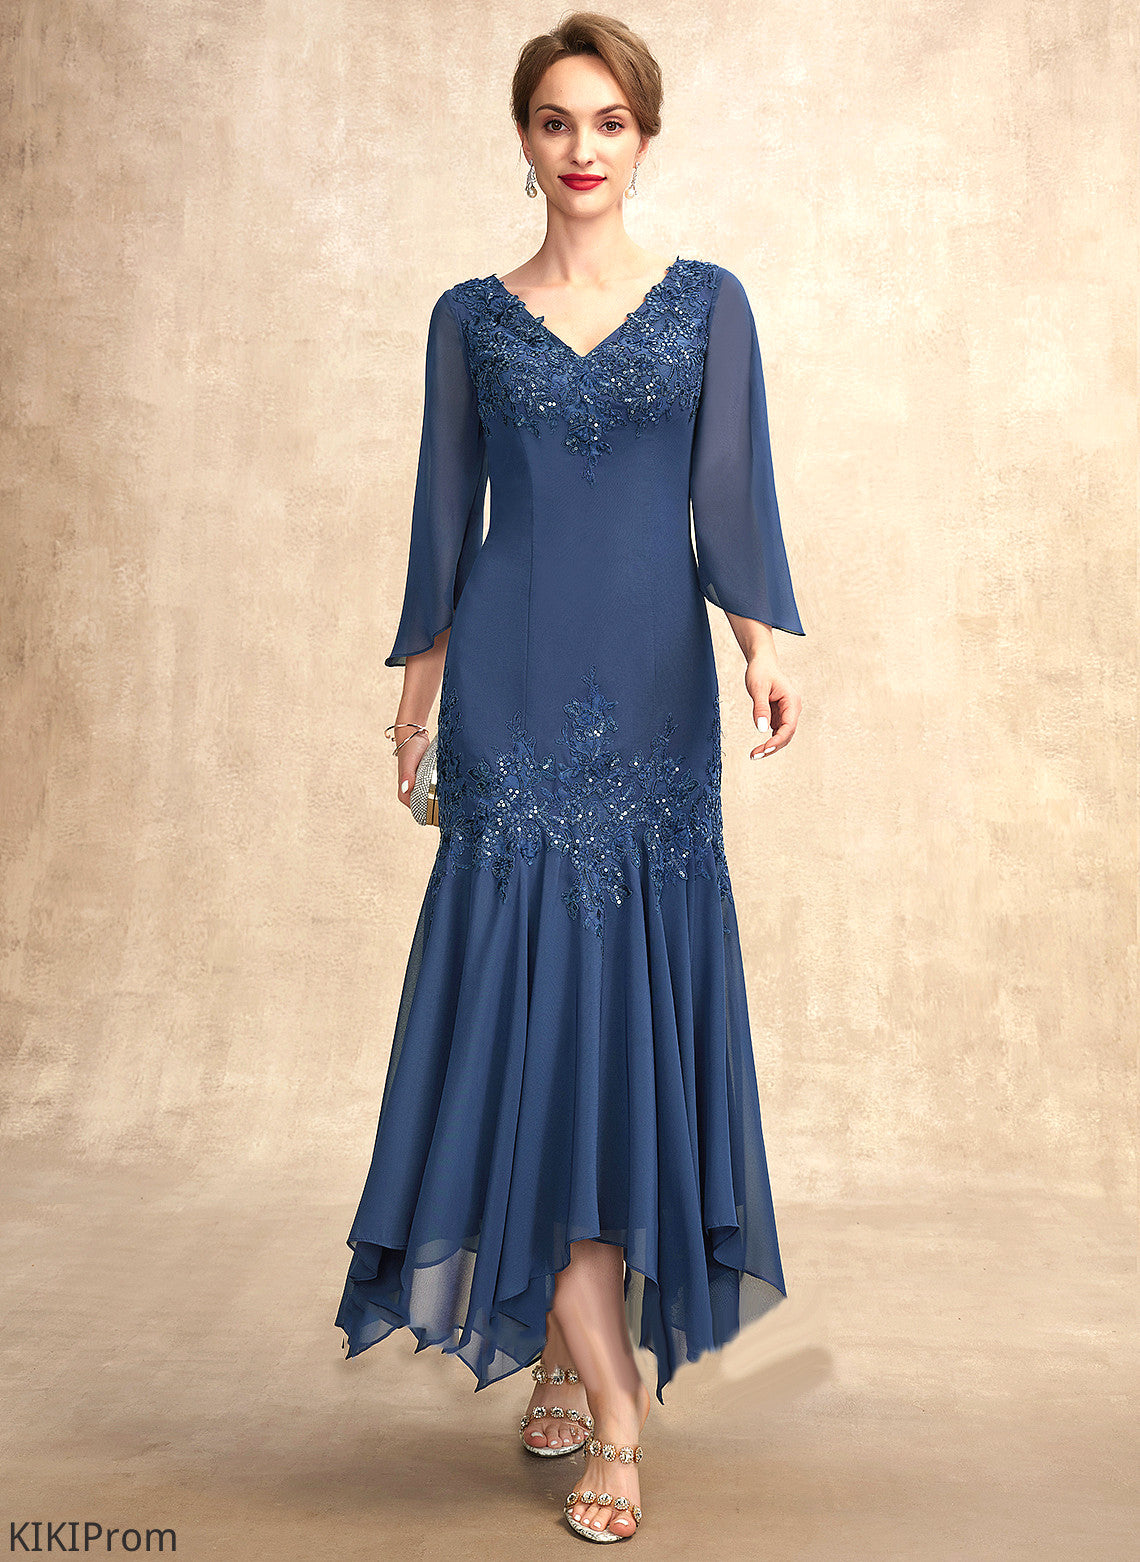 Ankle-Length With V-neck Mother of the Bride Dresses Chiffon the Mother Makena Sequins Bride Lace Dress of Trumpet/Mermaid Appliques